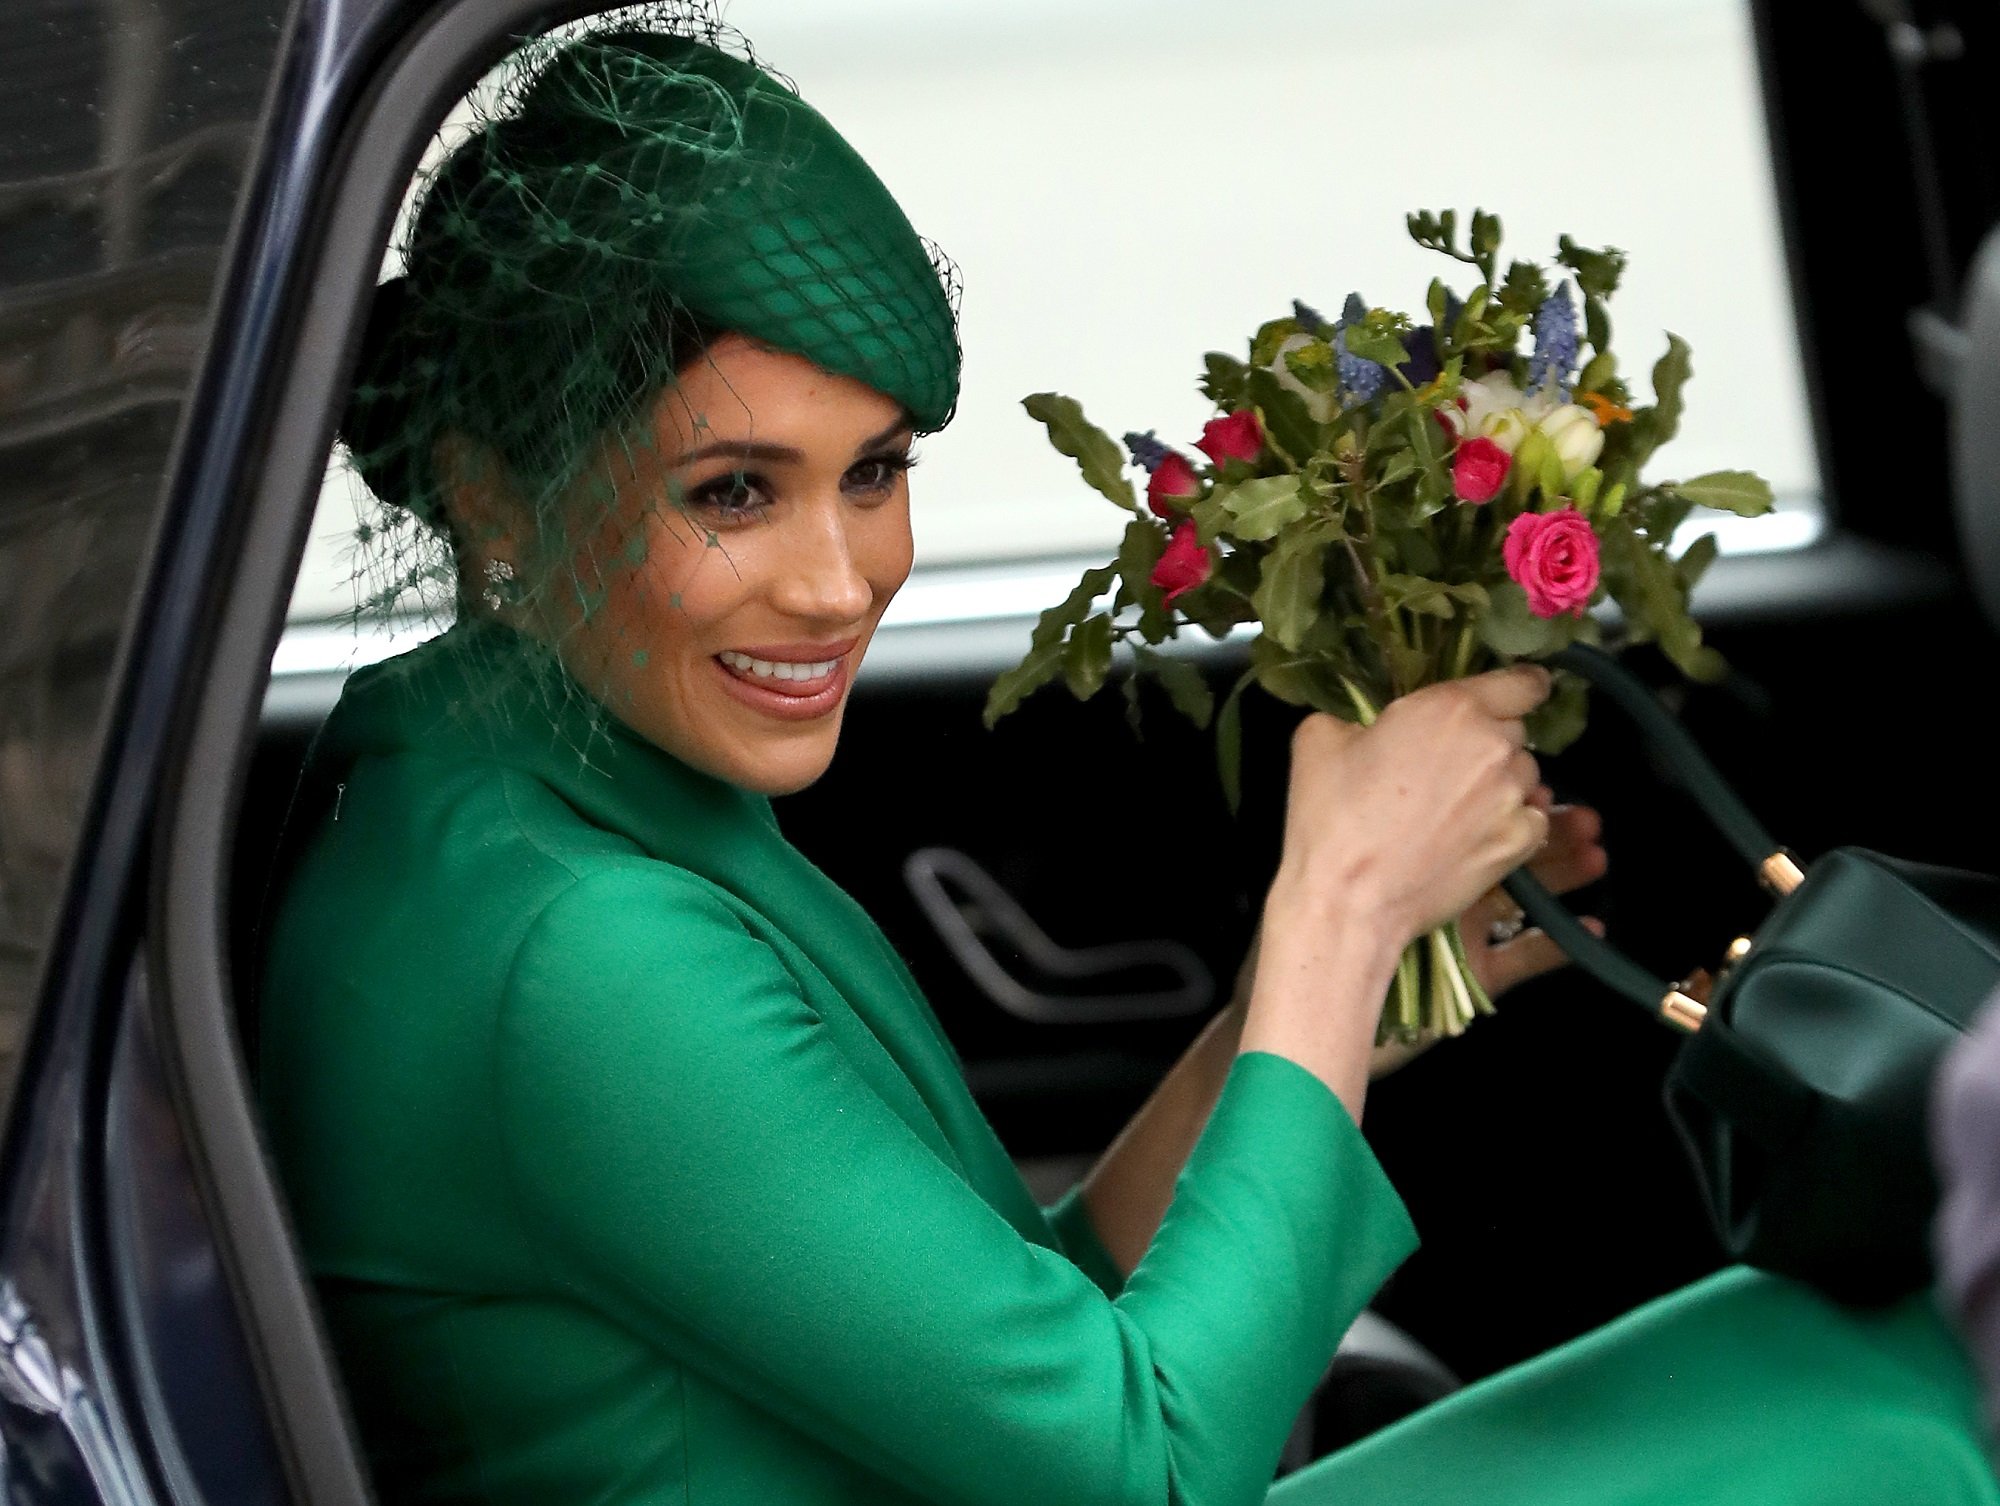 Meghan Markle the Duchess of Sussex, seen here in a green dress sitting in a car, has allegedly ruined a local Starbucks for the worse